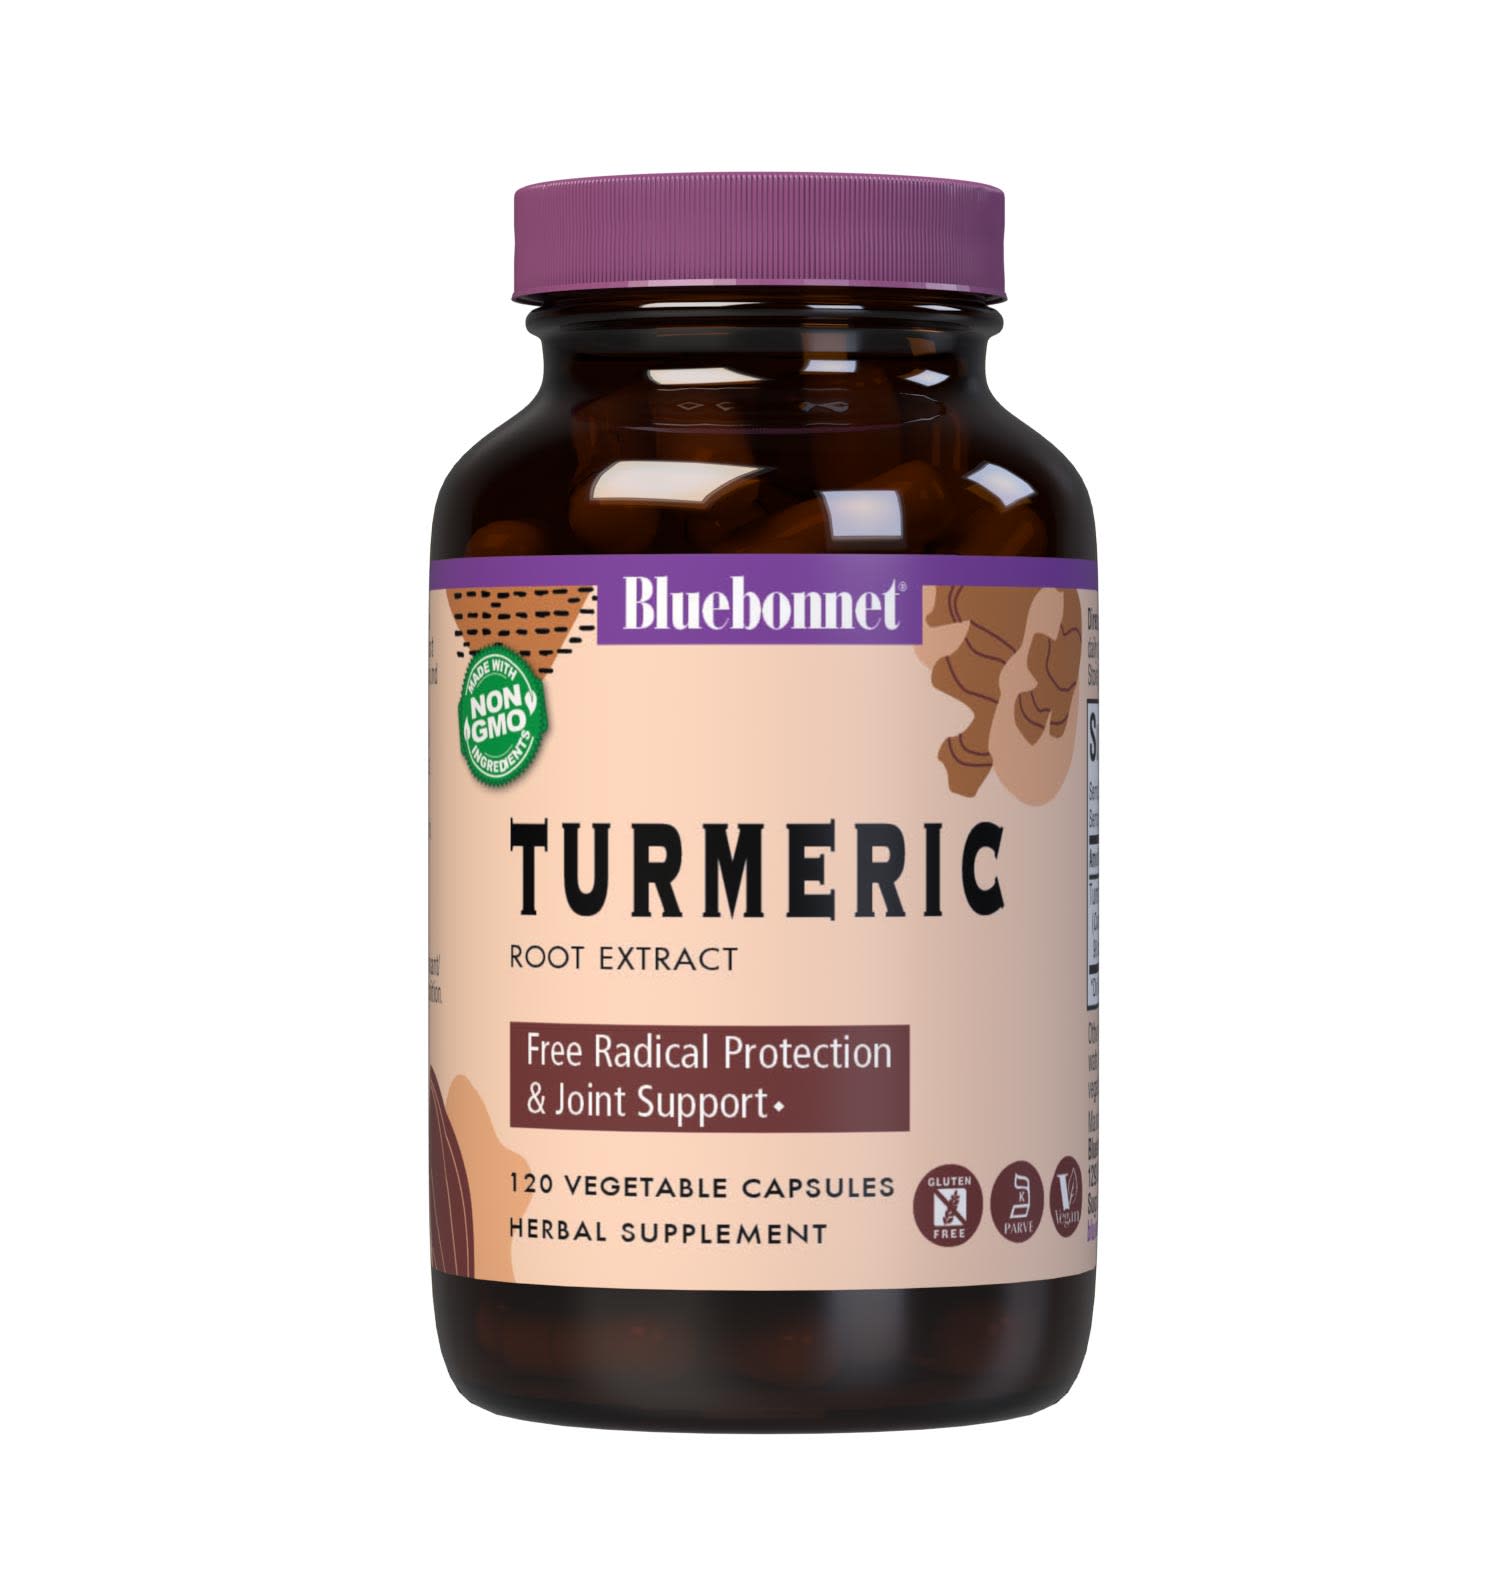 Bluebonnet’s Turmeric Root Extract 60 Capsules provide a standardized extract of total curcuminoids, the most researched active constituents found in turmeric. A clean and gentle water-based extraction method is employed to capture and preserve turmeric’s most valuable components. #size_120 count